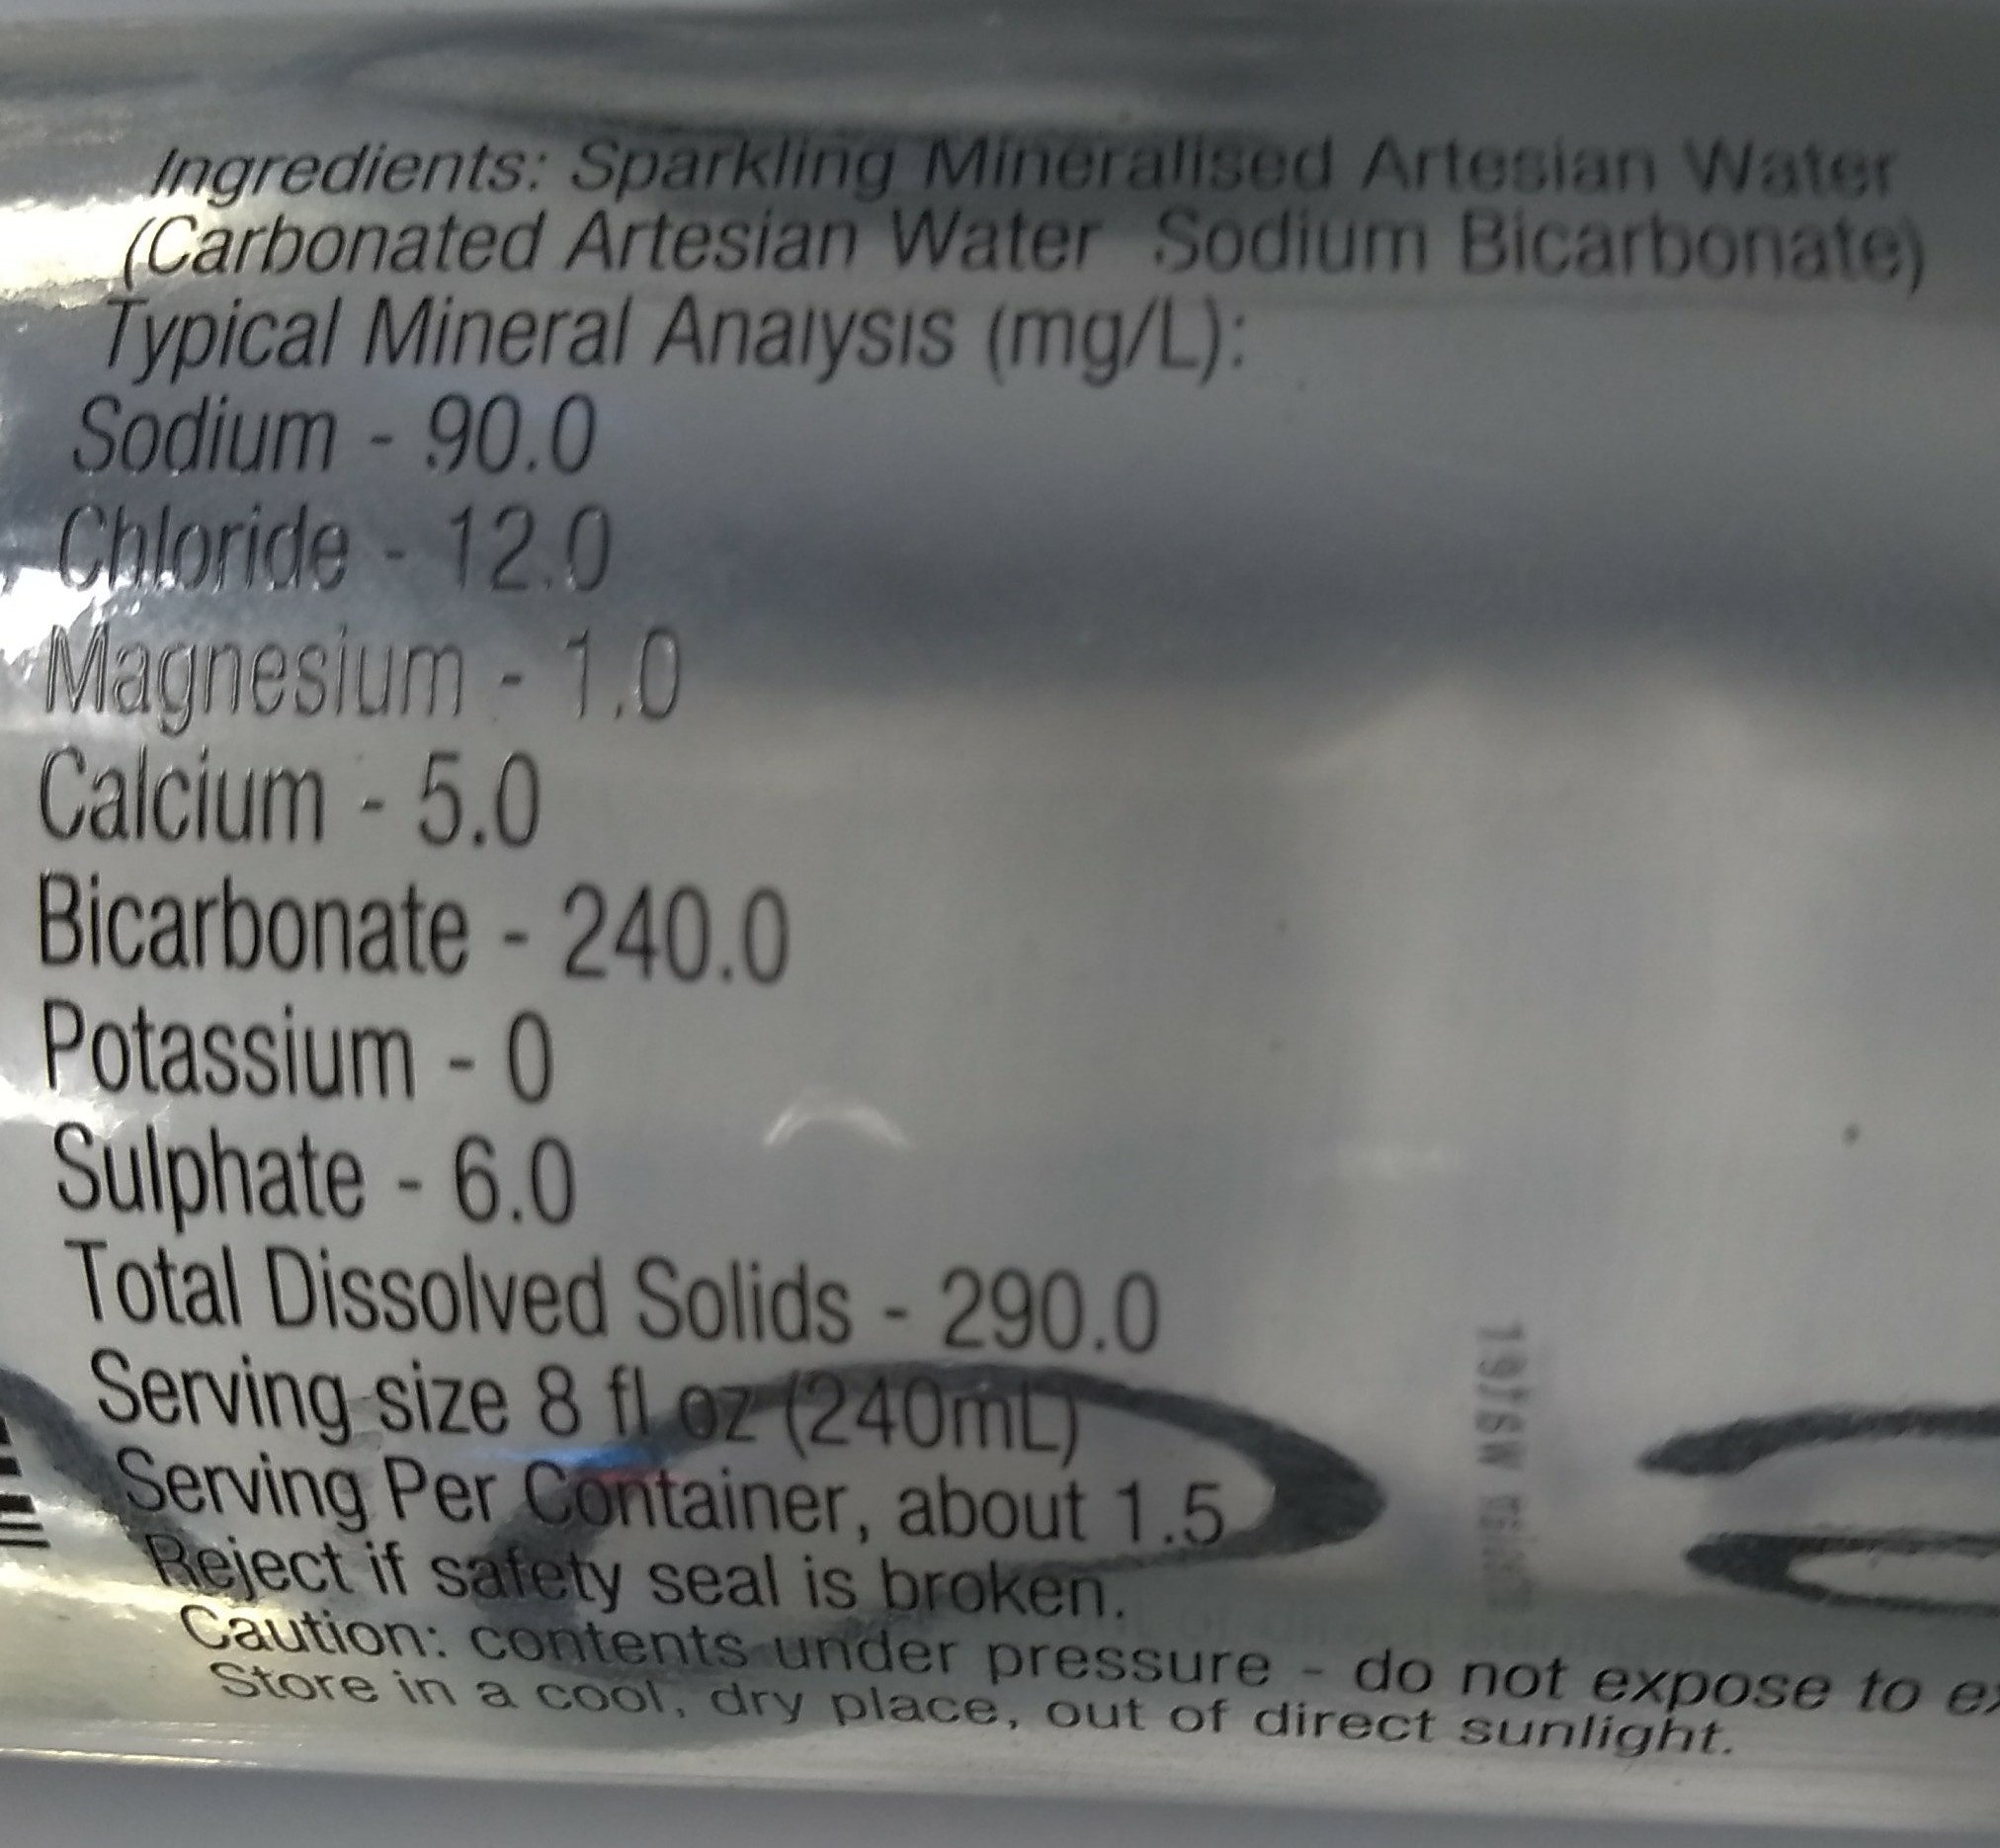 Sparkling artesian water from norway - Nutrition facts